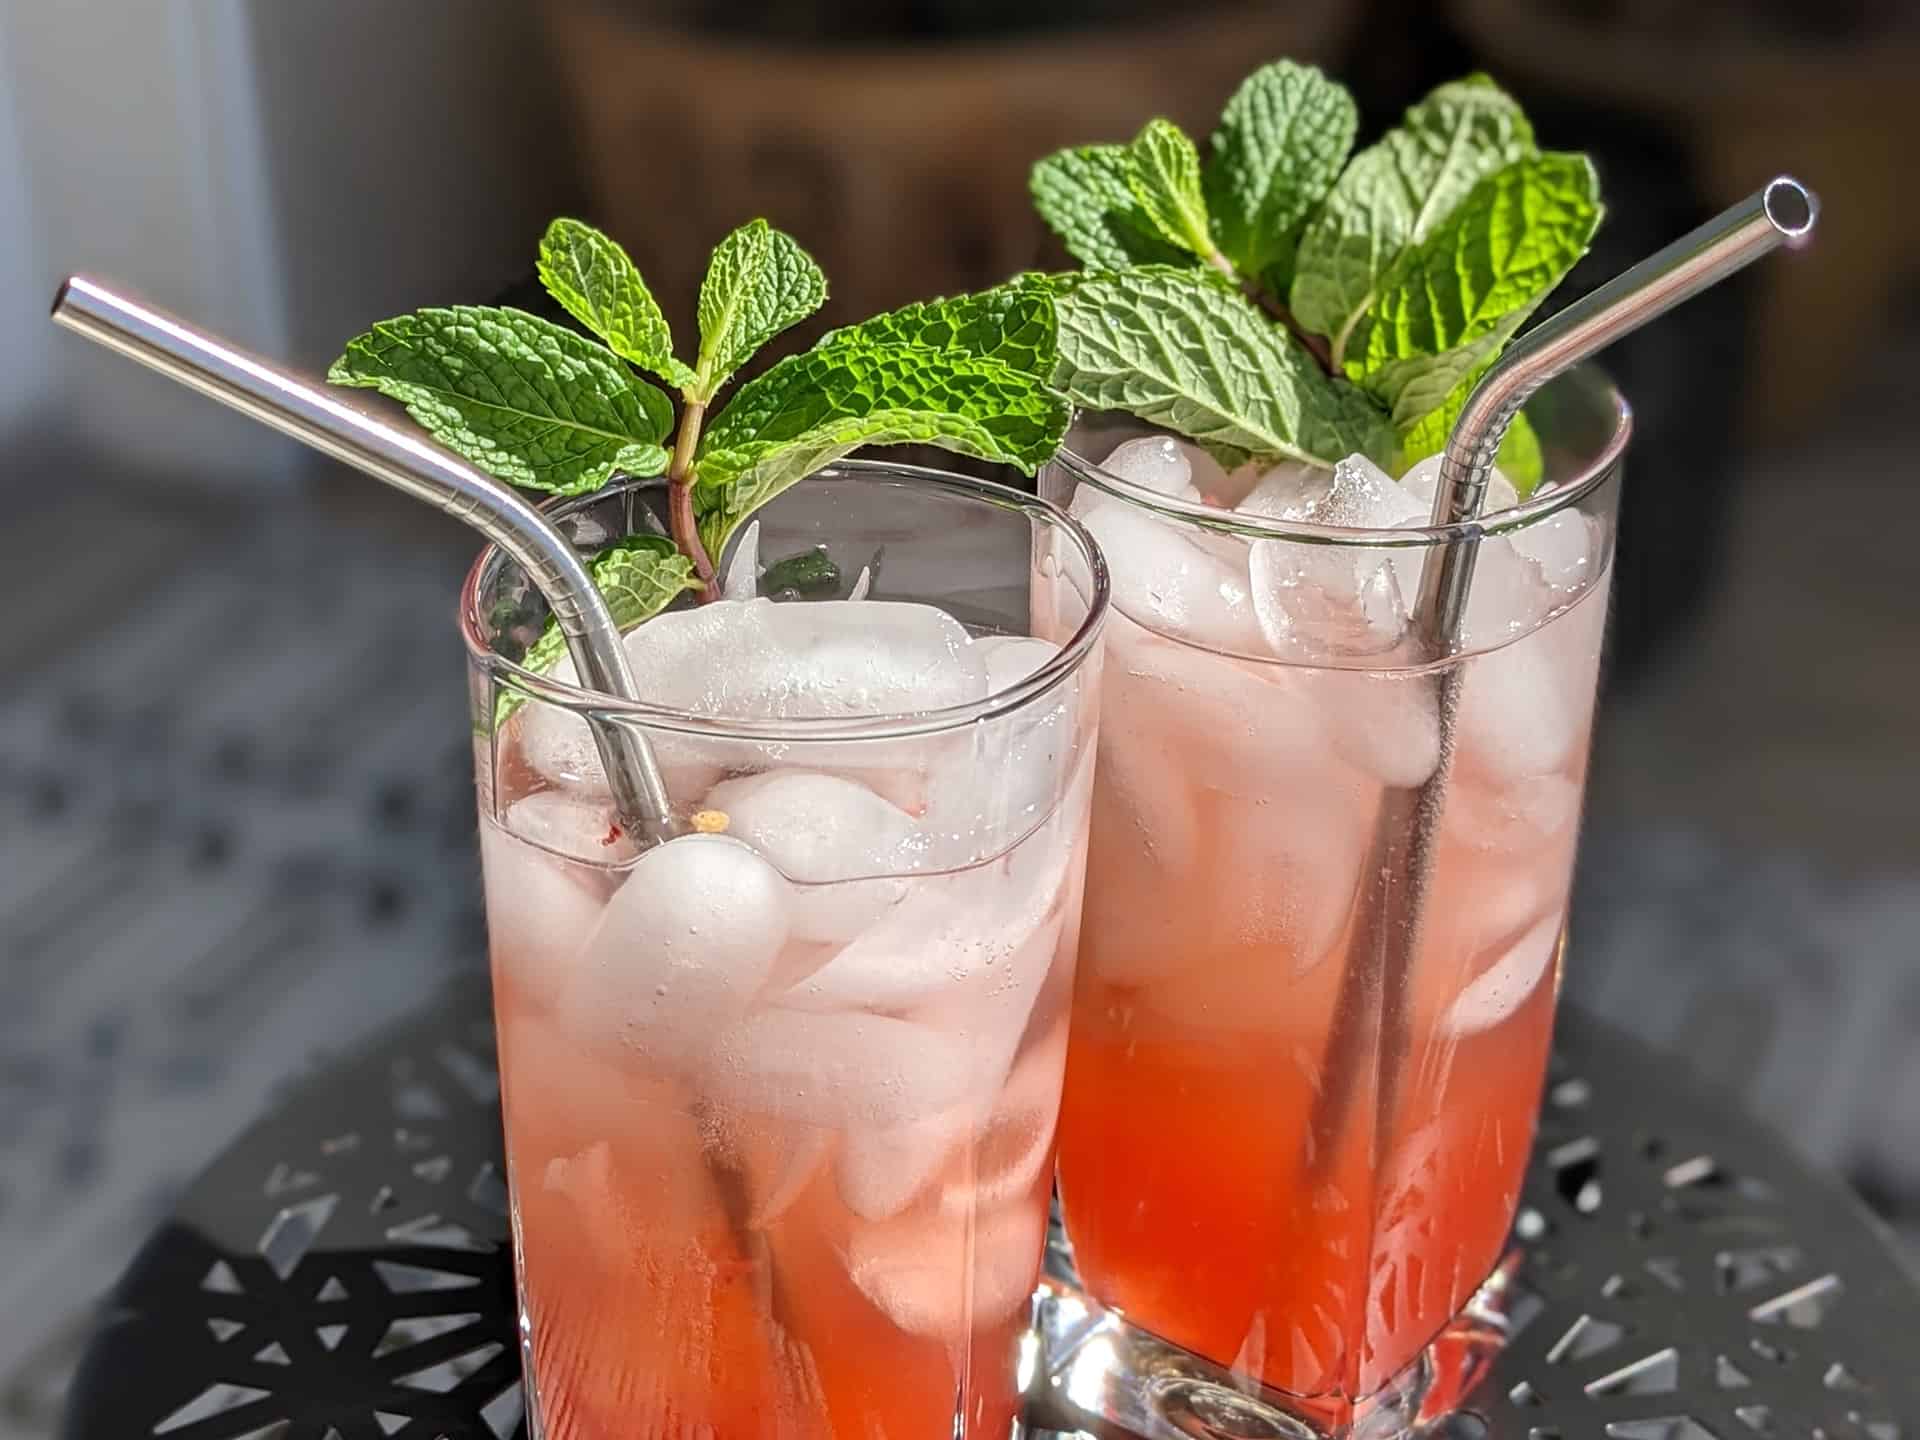 A closeup view of two strawberry jalapeno mojitos garnished with mint sprigs